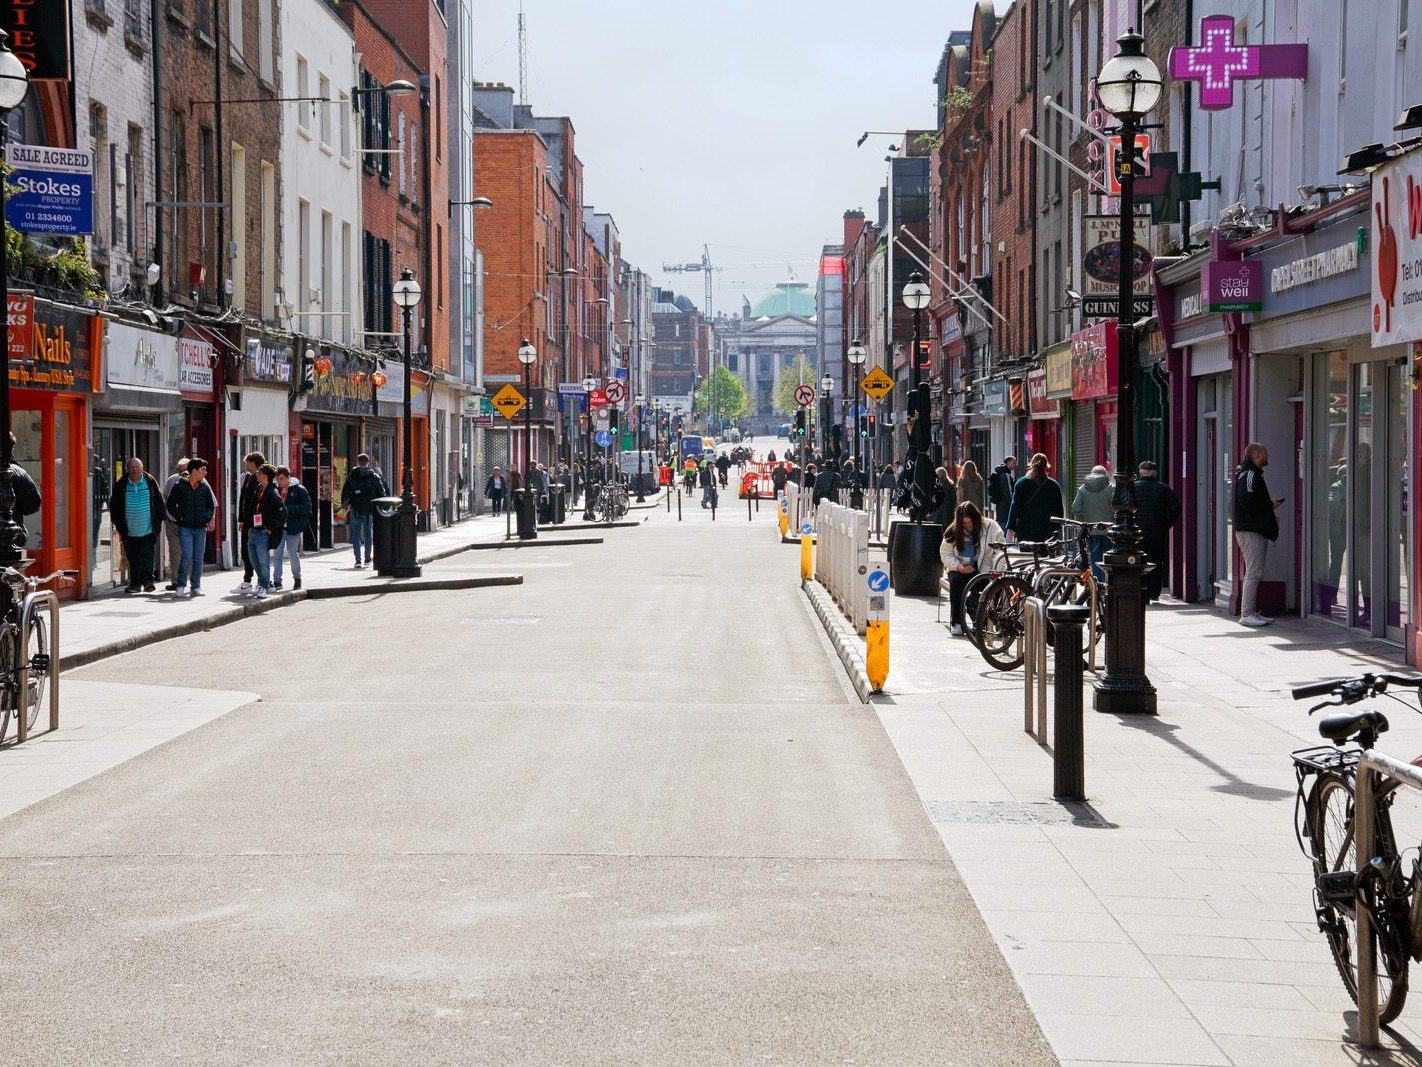 CAPEL STREET [THE RECONFIGURATION WORK HAS BEGUN AT THE LIFFEY END OF THE STREET]-223742-1